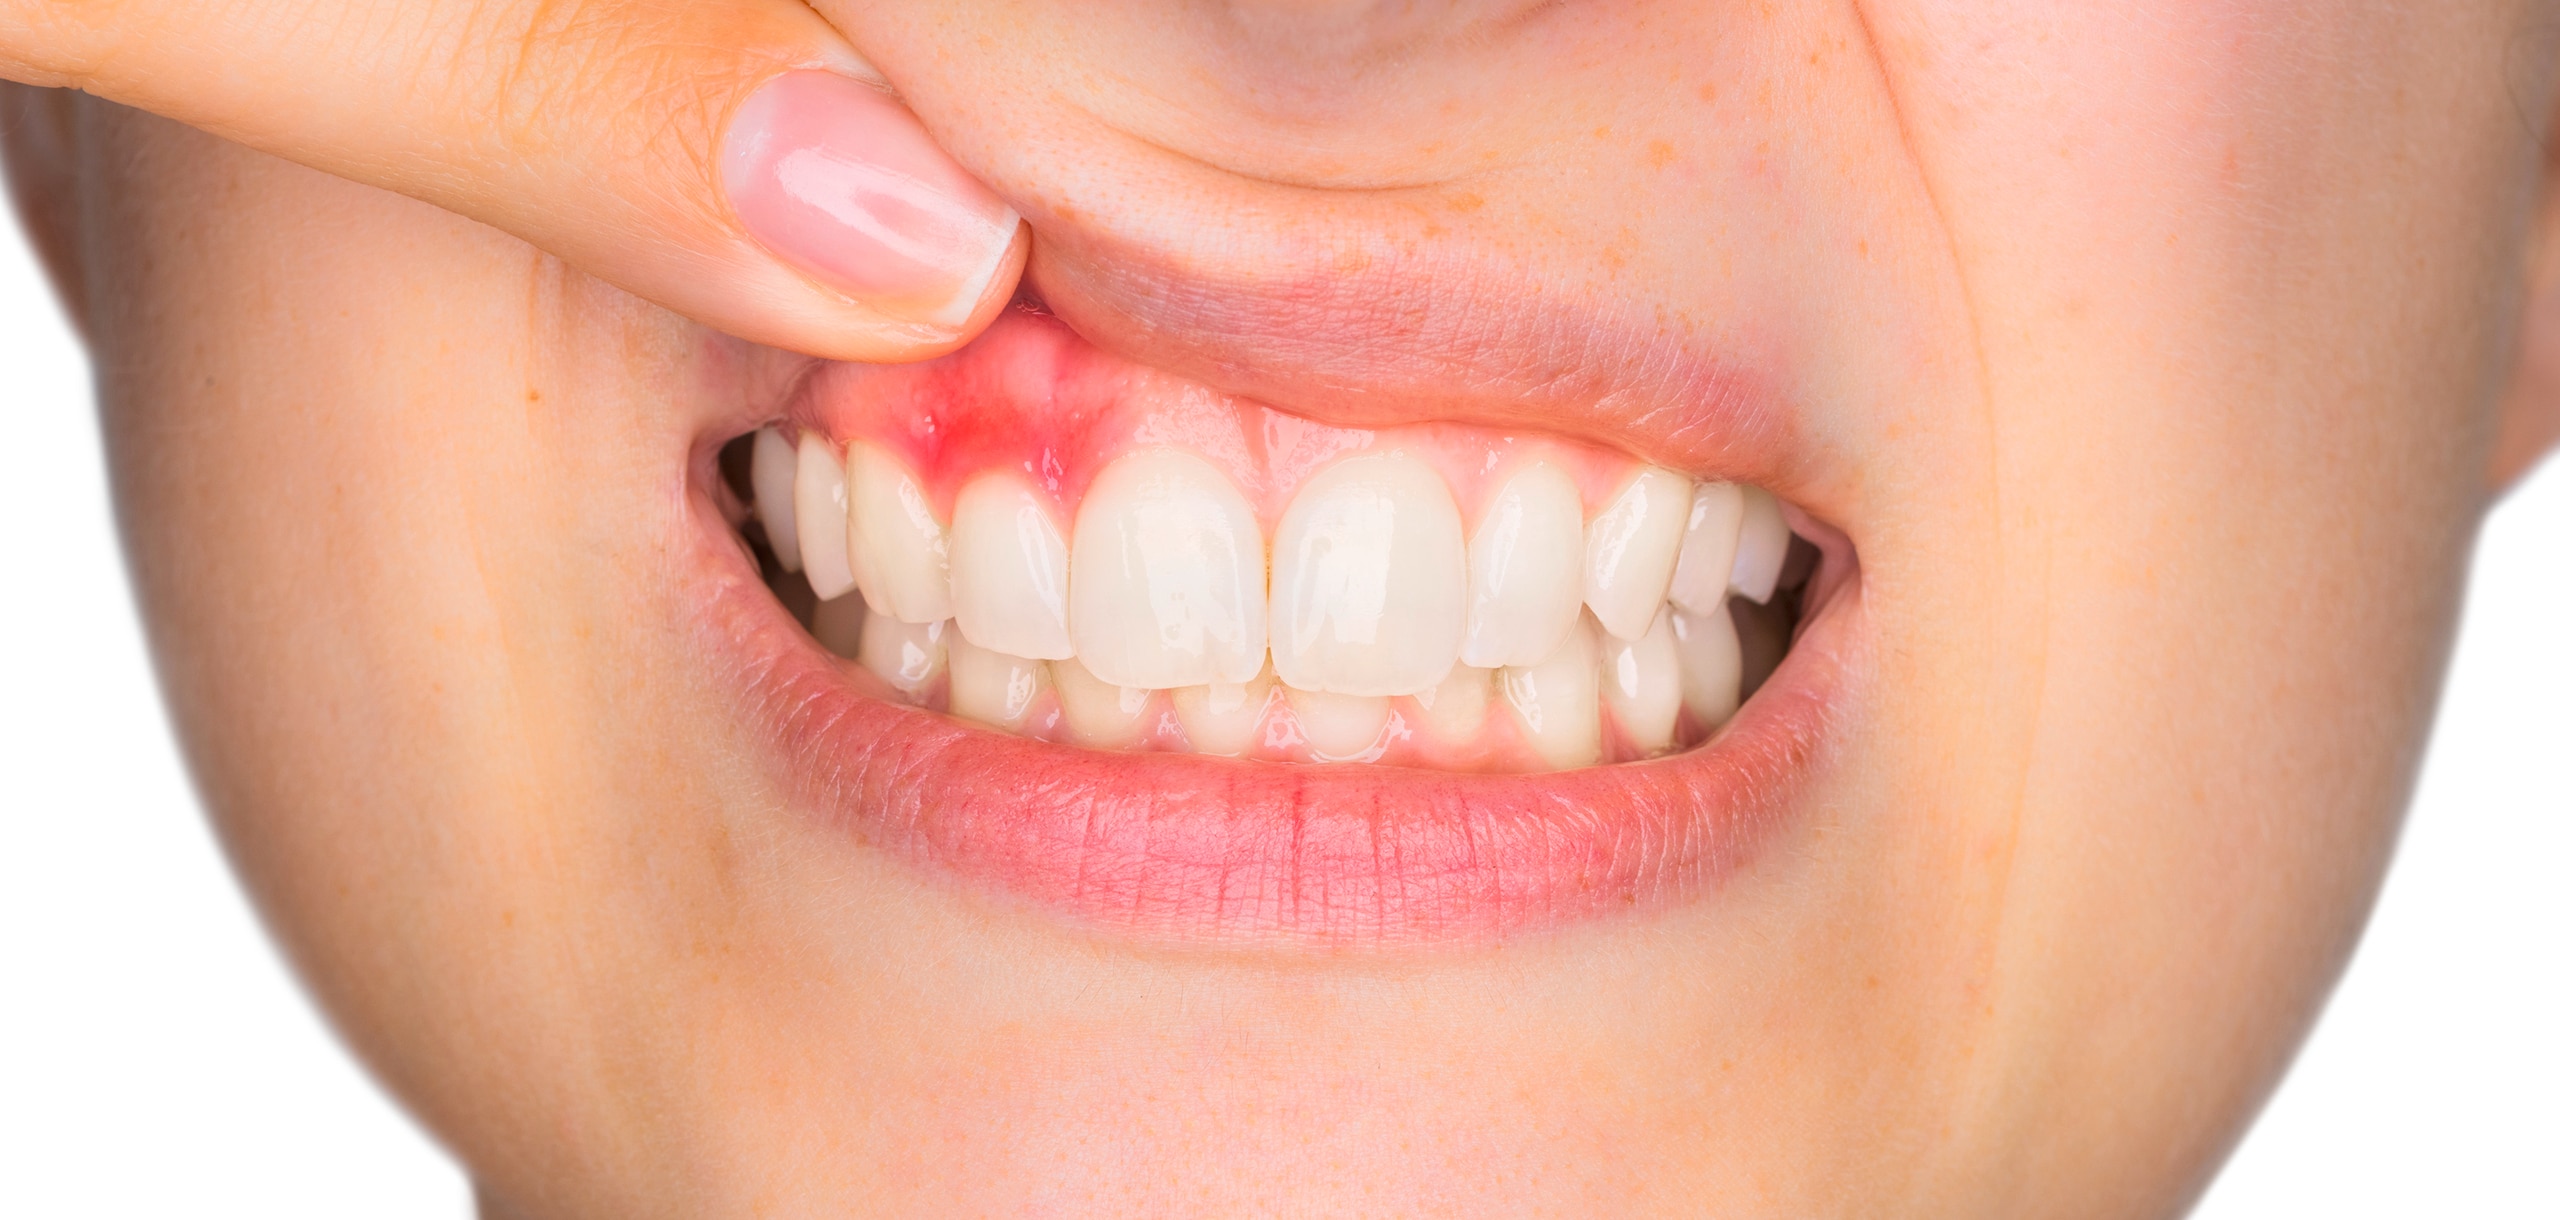 What is gingivitis and what causes it